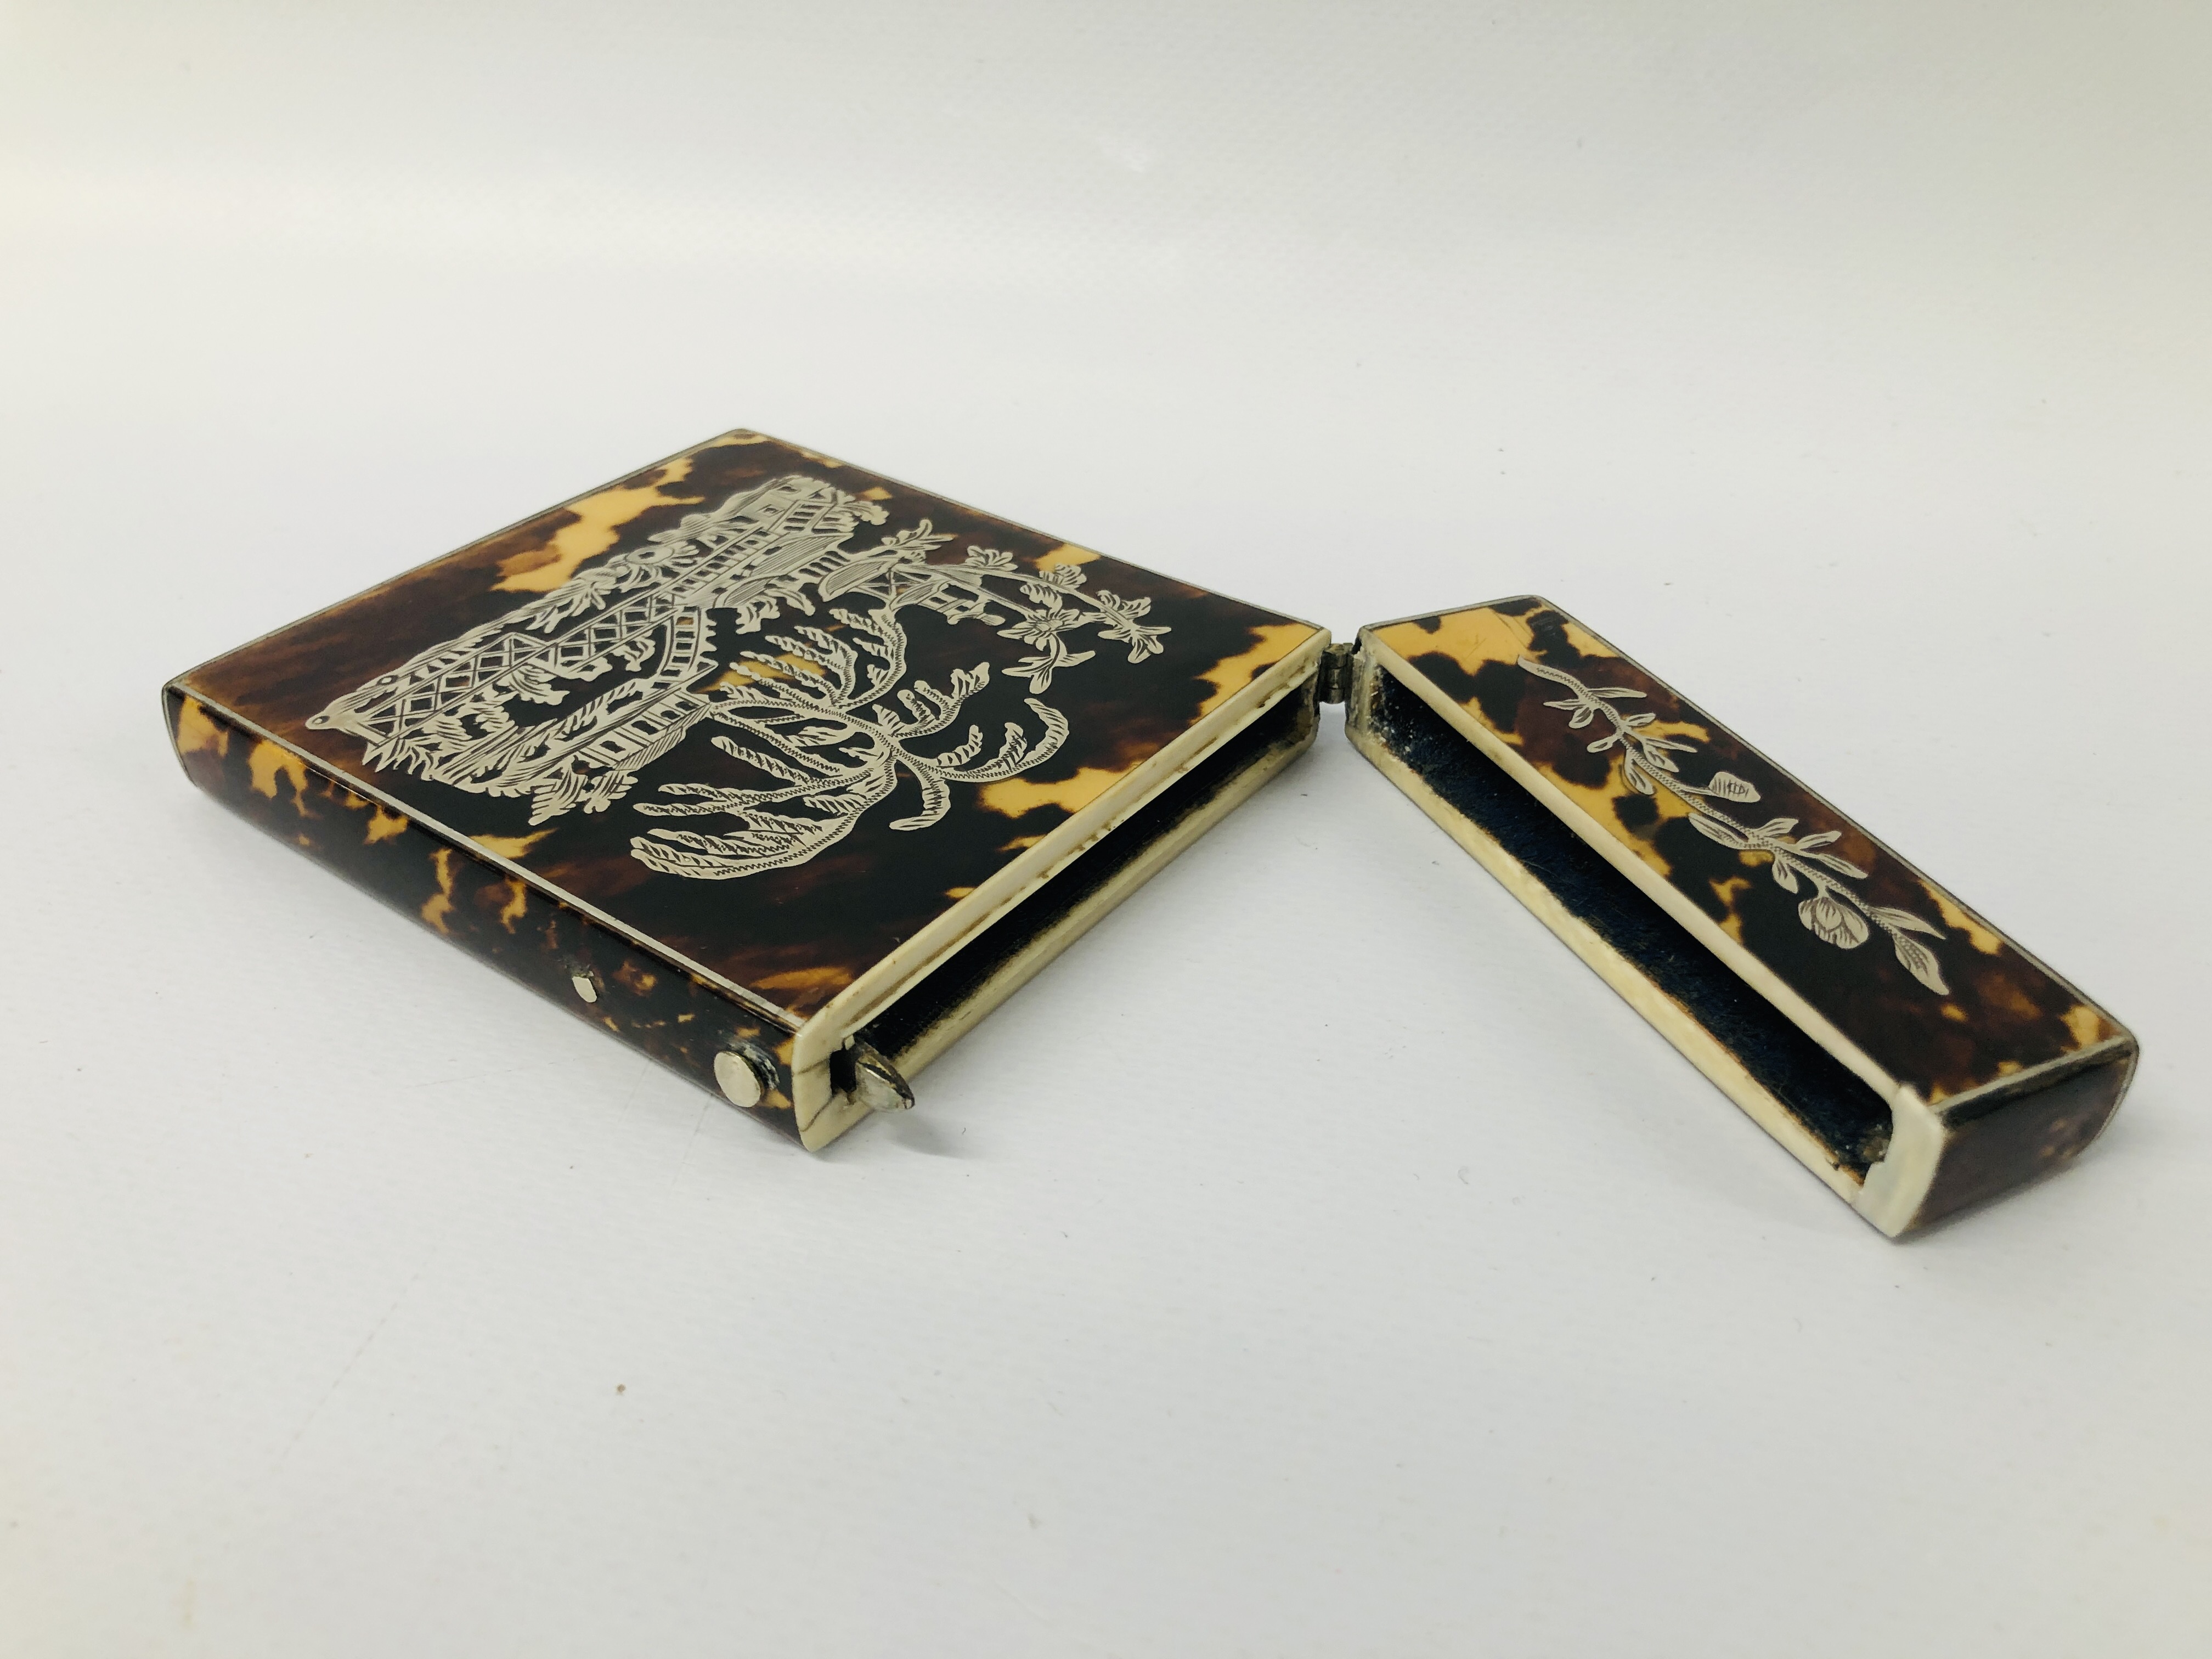 ANTIQUE TORTOISE SHELL SILVER INLAID CARD CASE. - Image 4 of 7